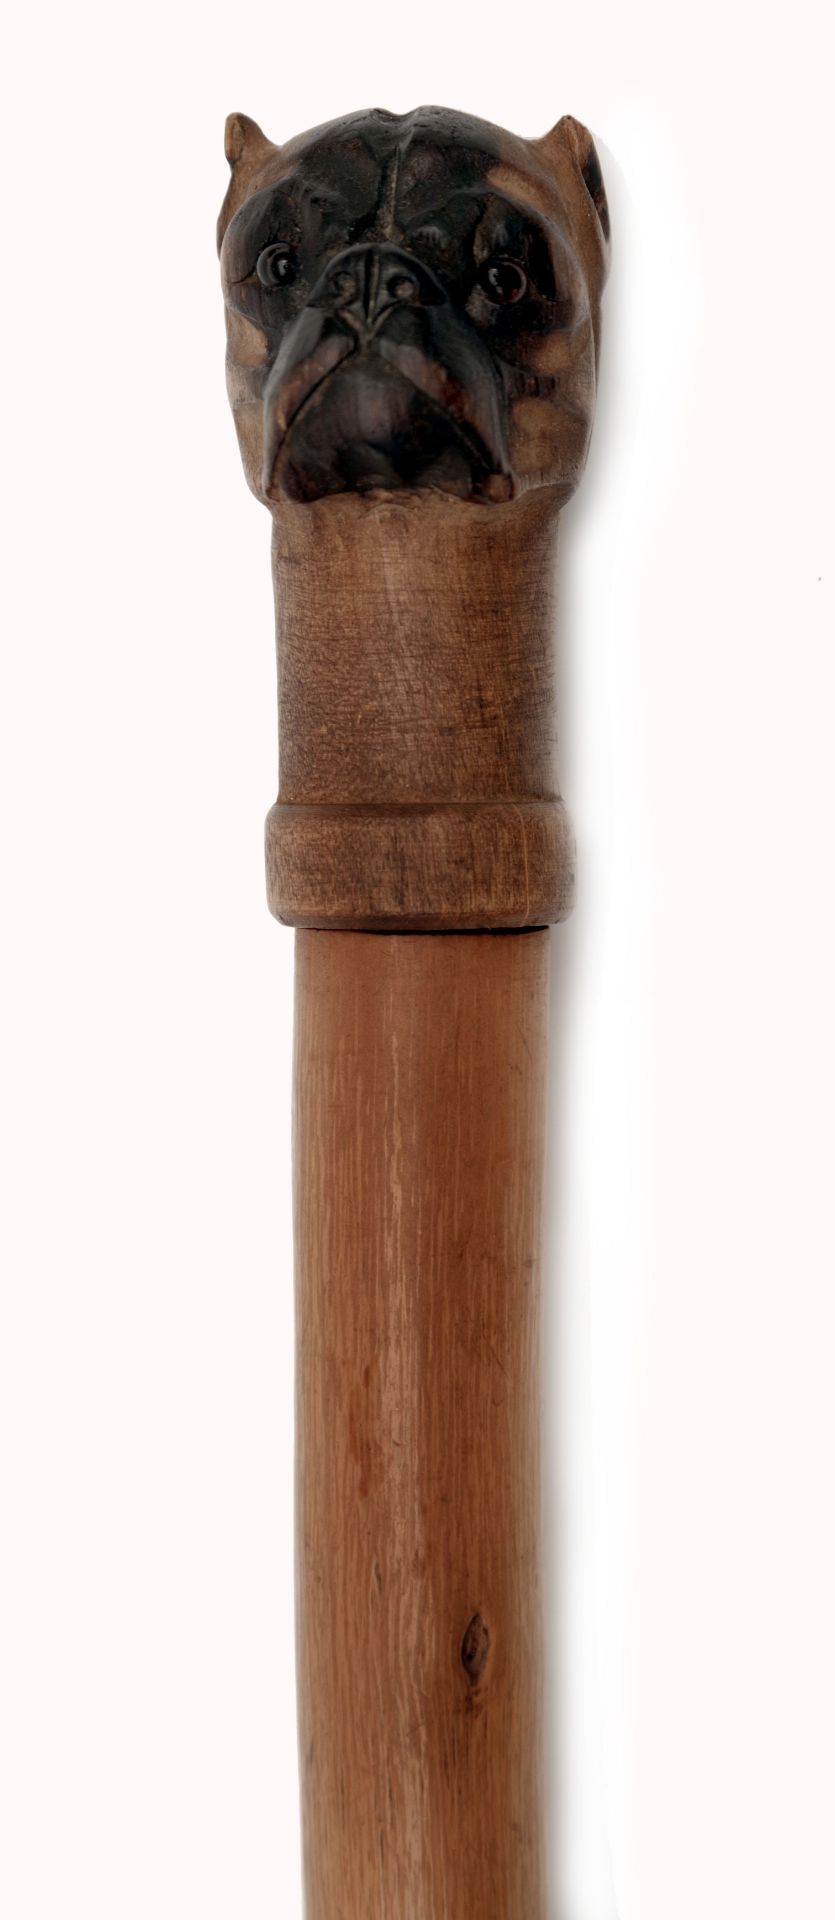 Walking cane with secret compartment - Image 3 of 4